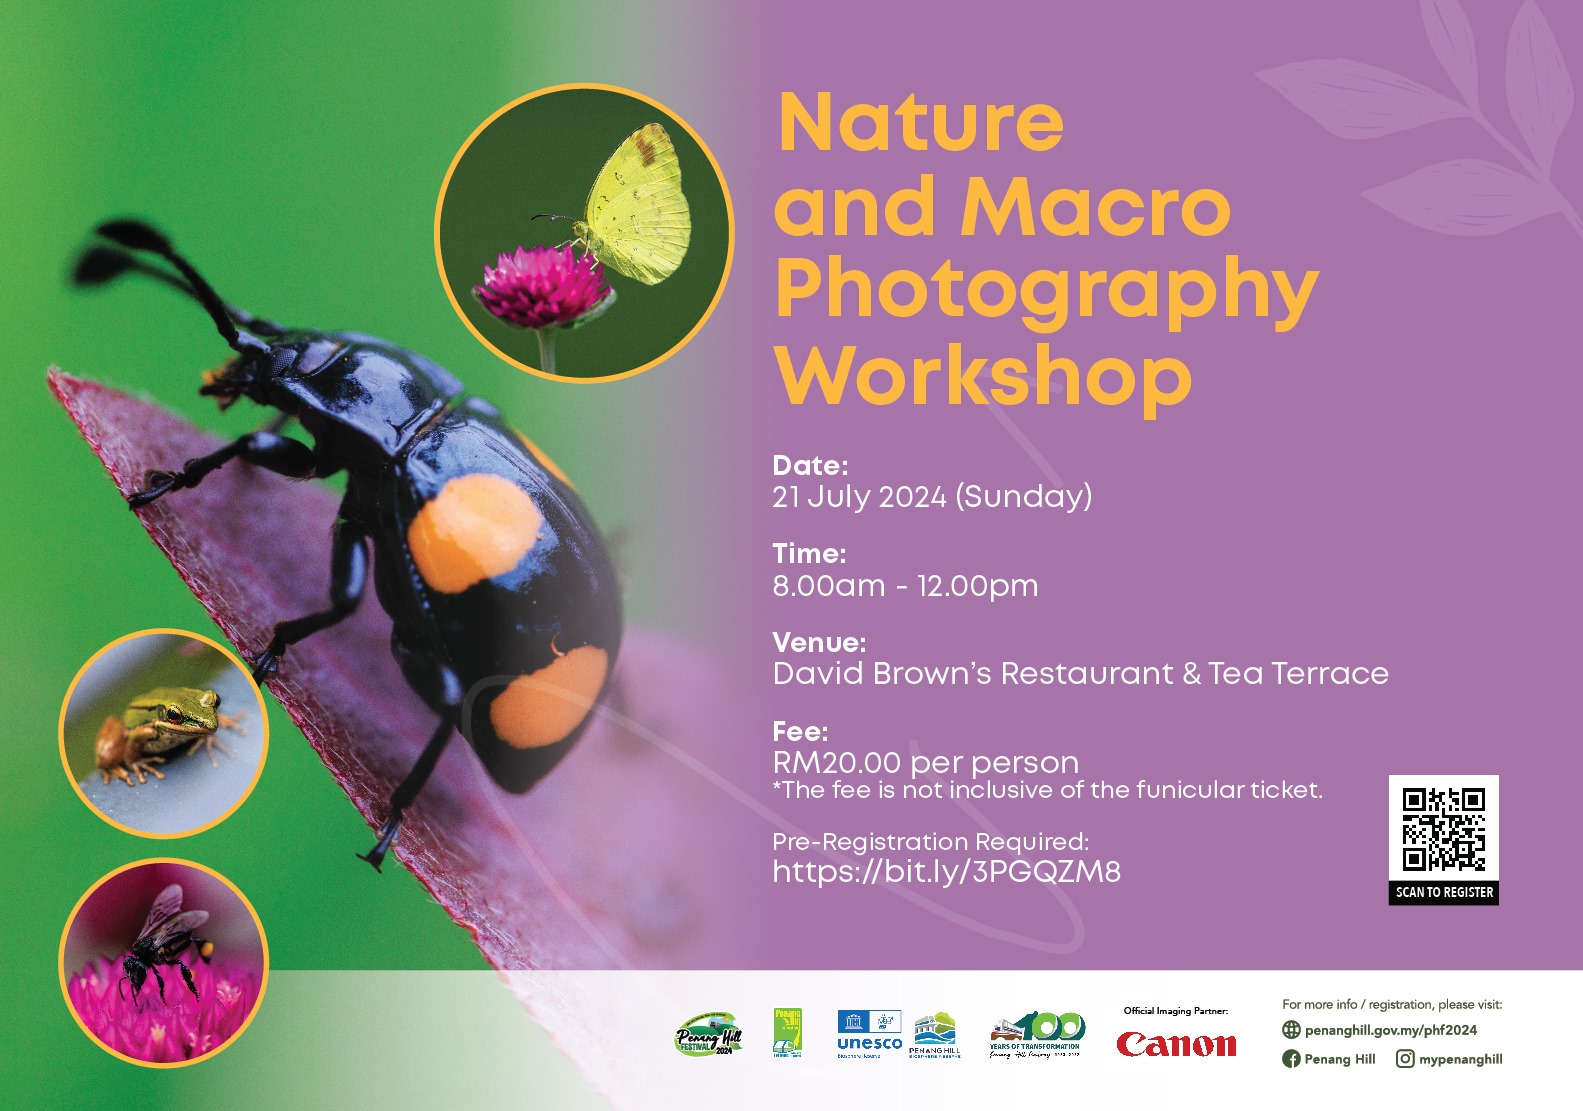 Nature and Macro Photography Workshop